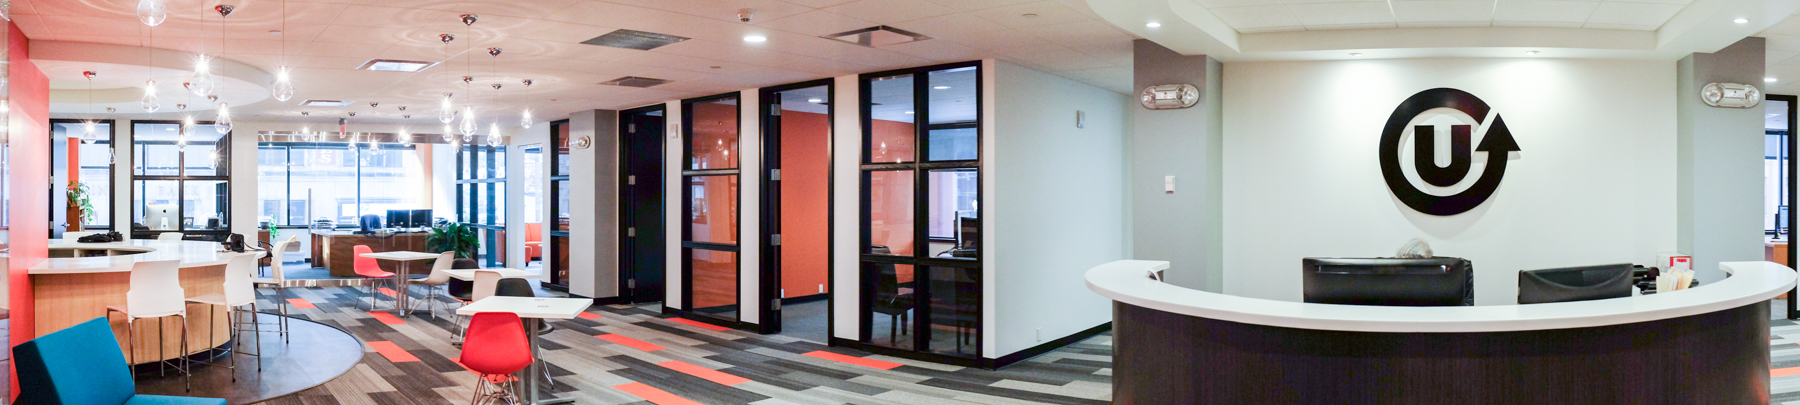 Interior panorama of the Upside Collective offices. A grey and orange blocked carpet is a prominent feature, along with a large decal of their logo on a white wall in the foreground. 